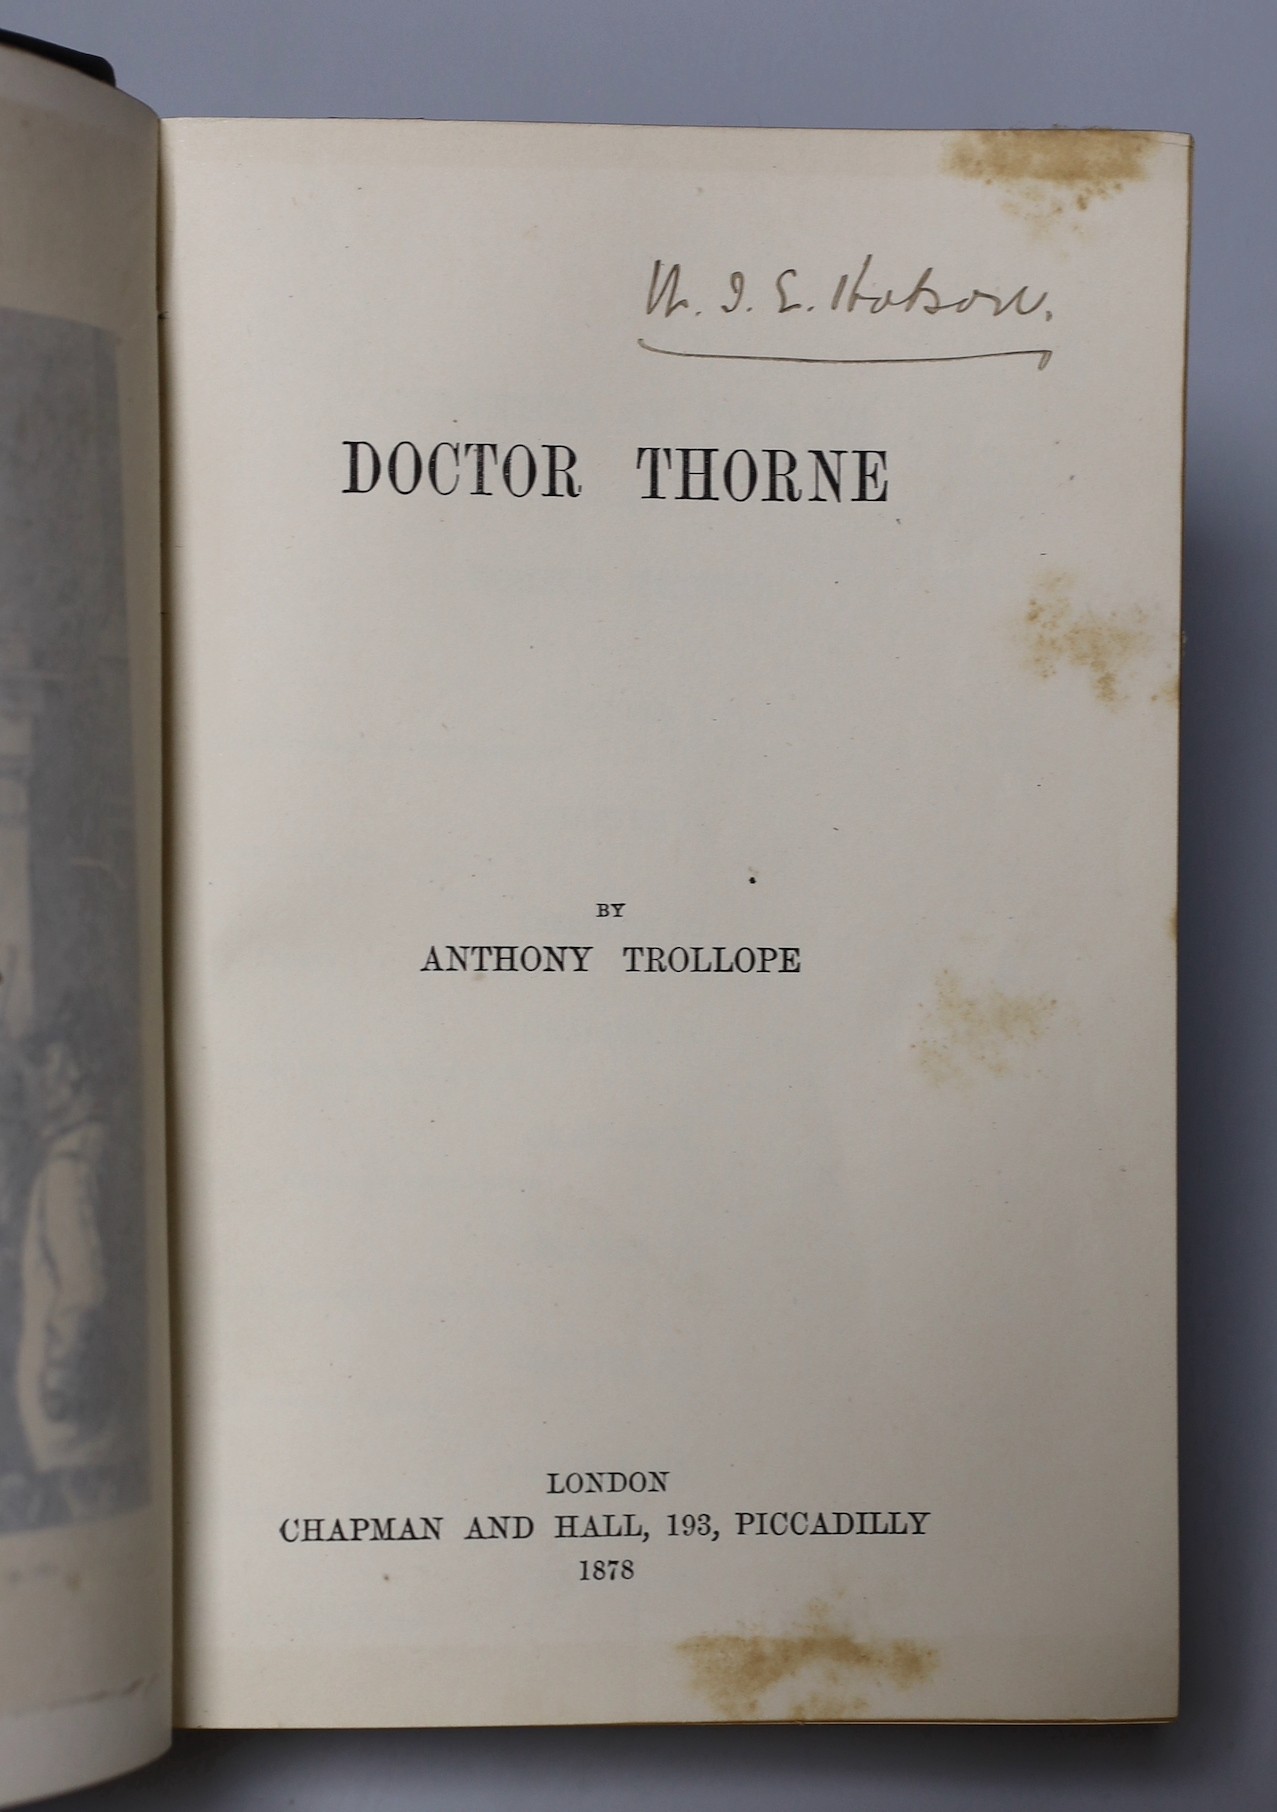 Trollope, Anthony - The Chronicles of Barsetshire, 8 vols, 8vo, full morocco, Chapman and Hall, London, 1879